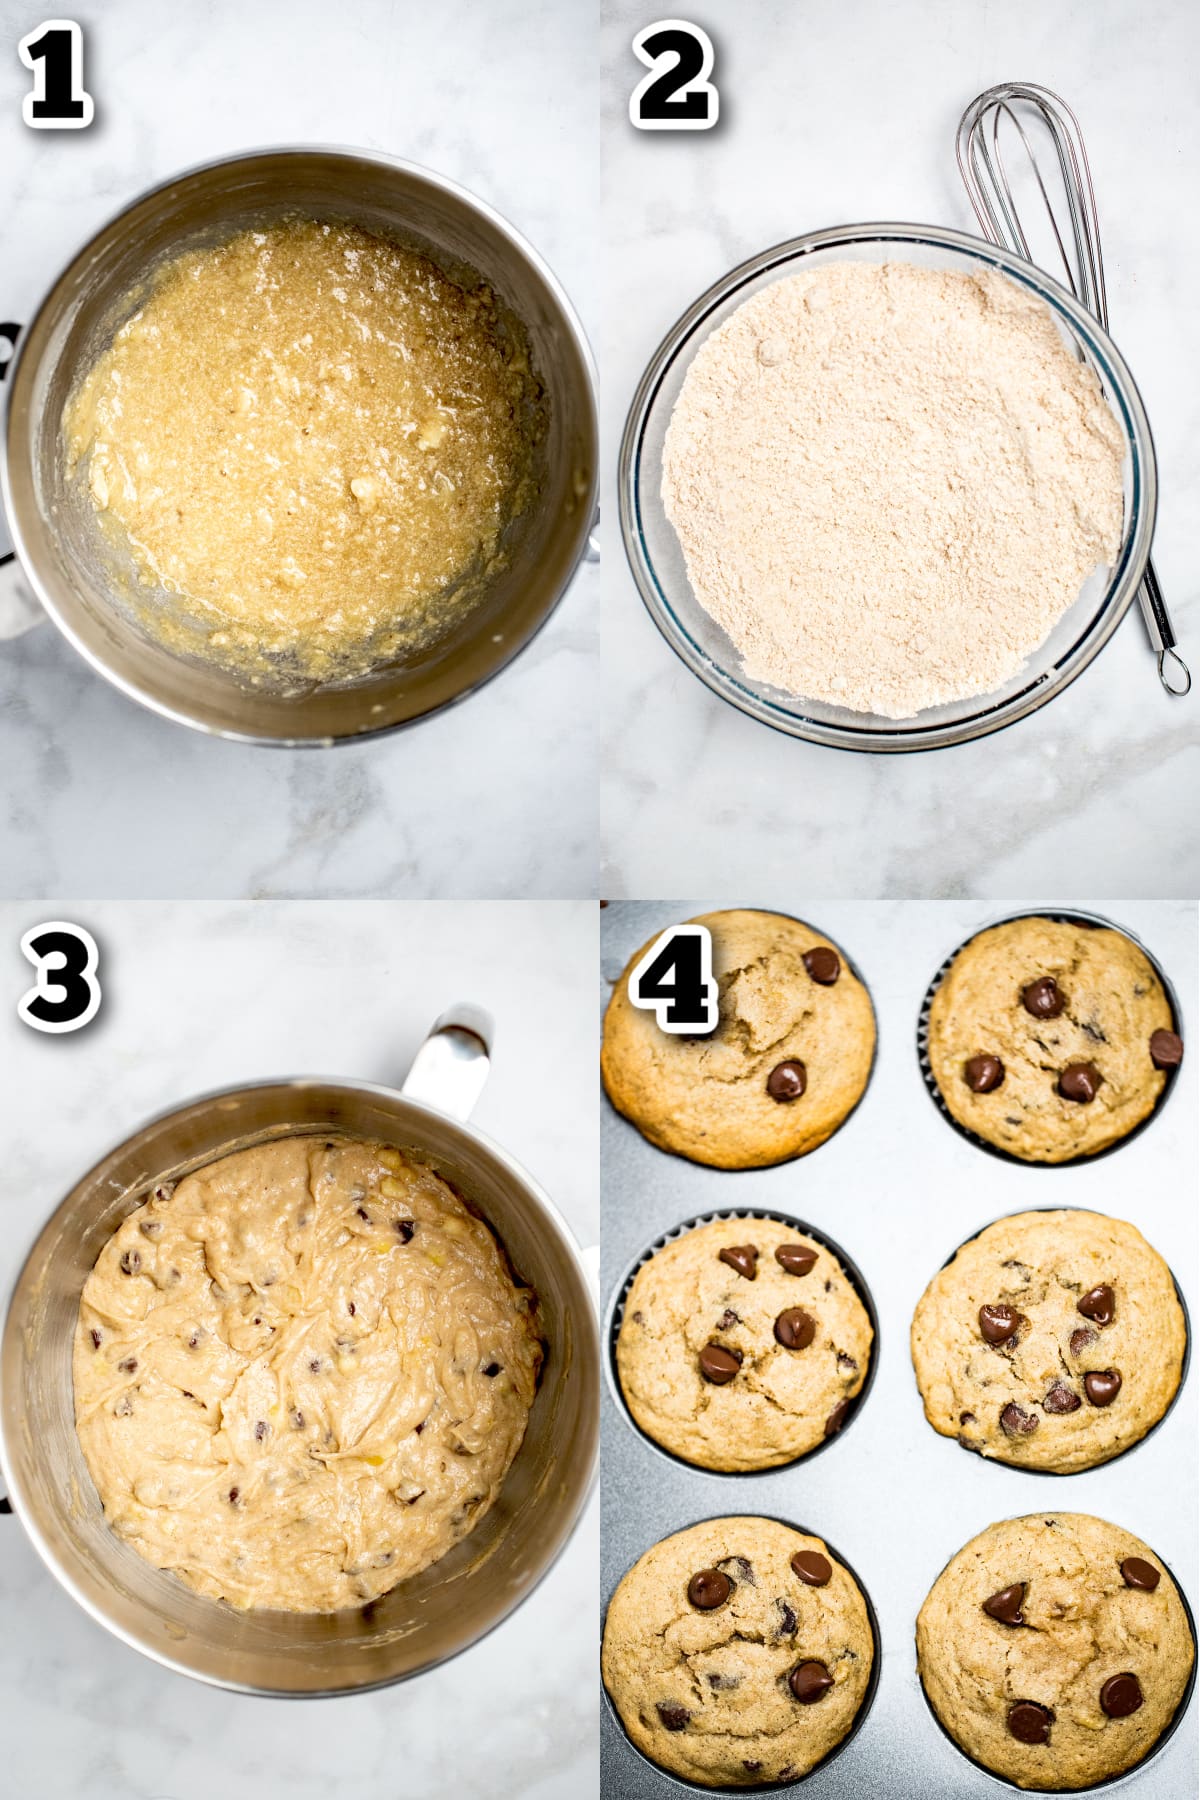 Step by step instructions for how to make chocolate chip banana muffins.